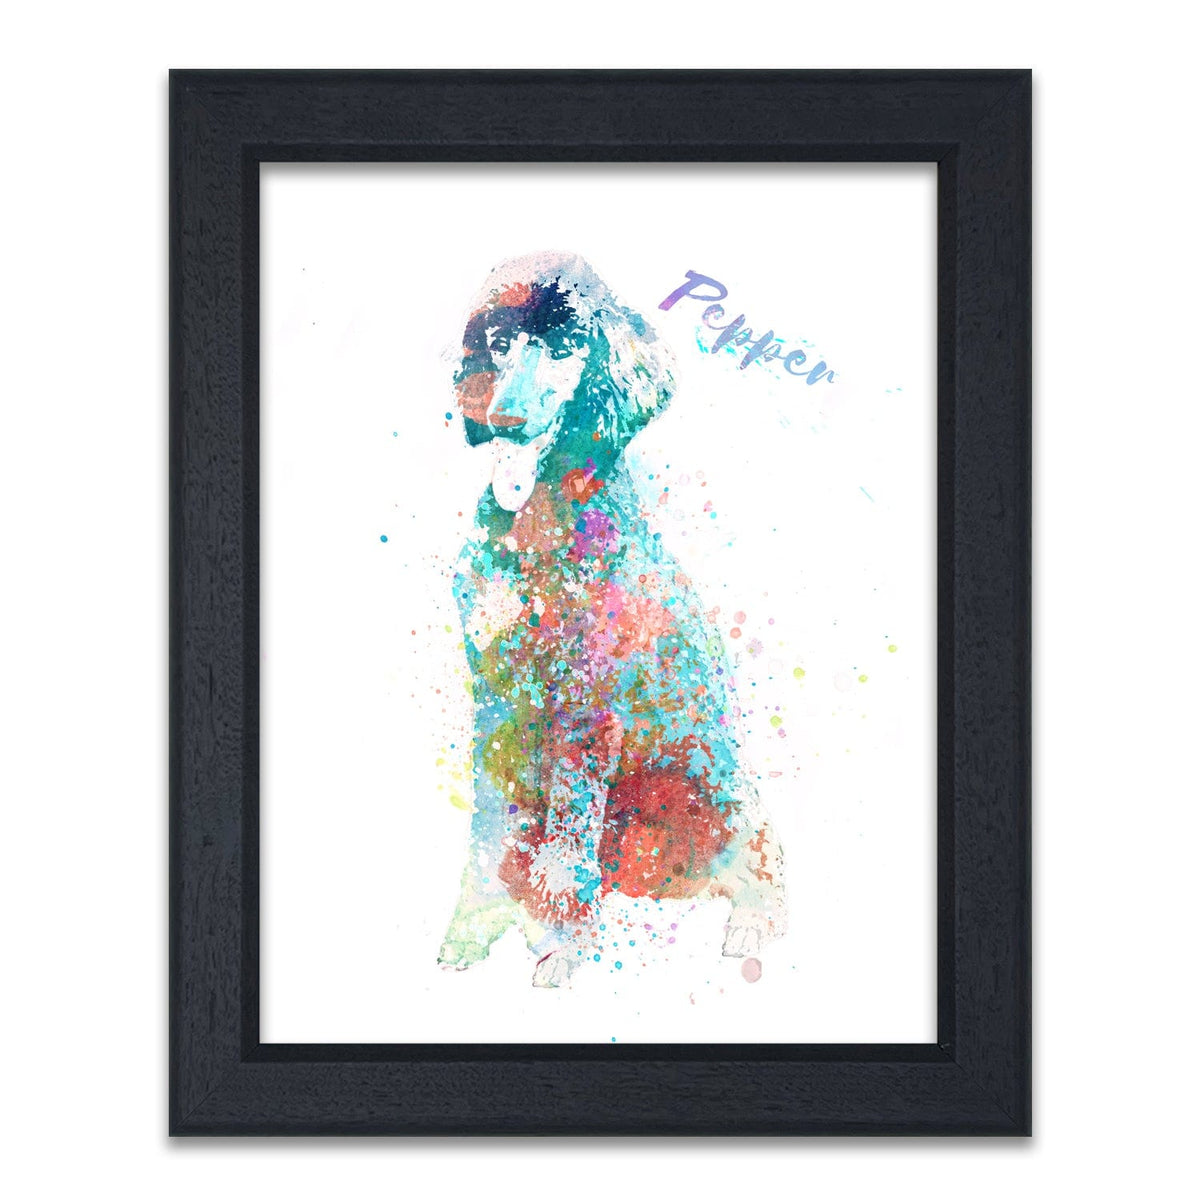 Framed Dog Art - Poodle Watercolor Print from Personal-Prints